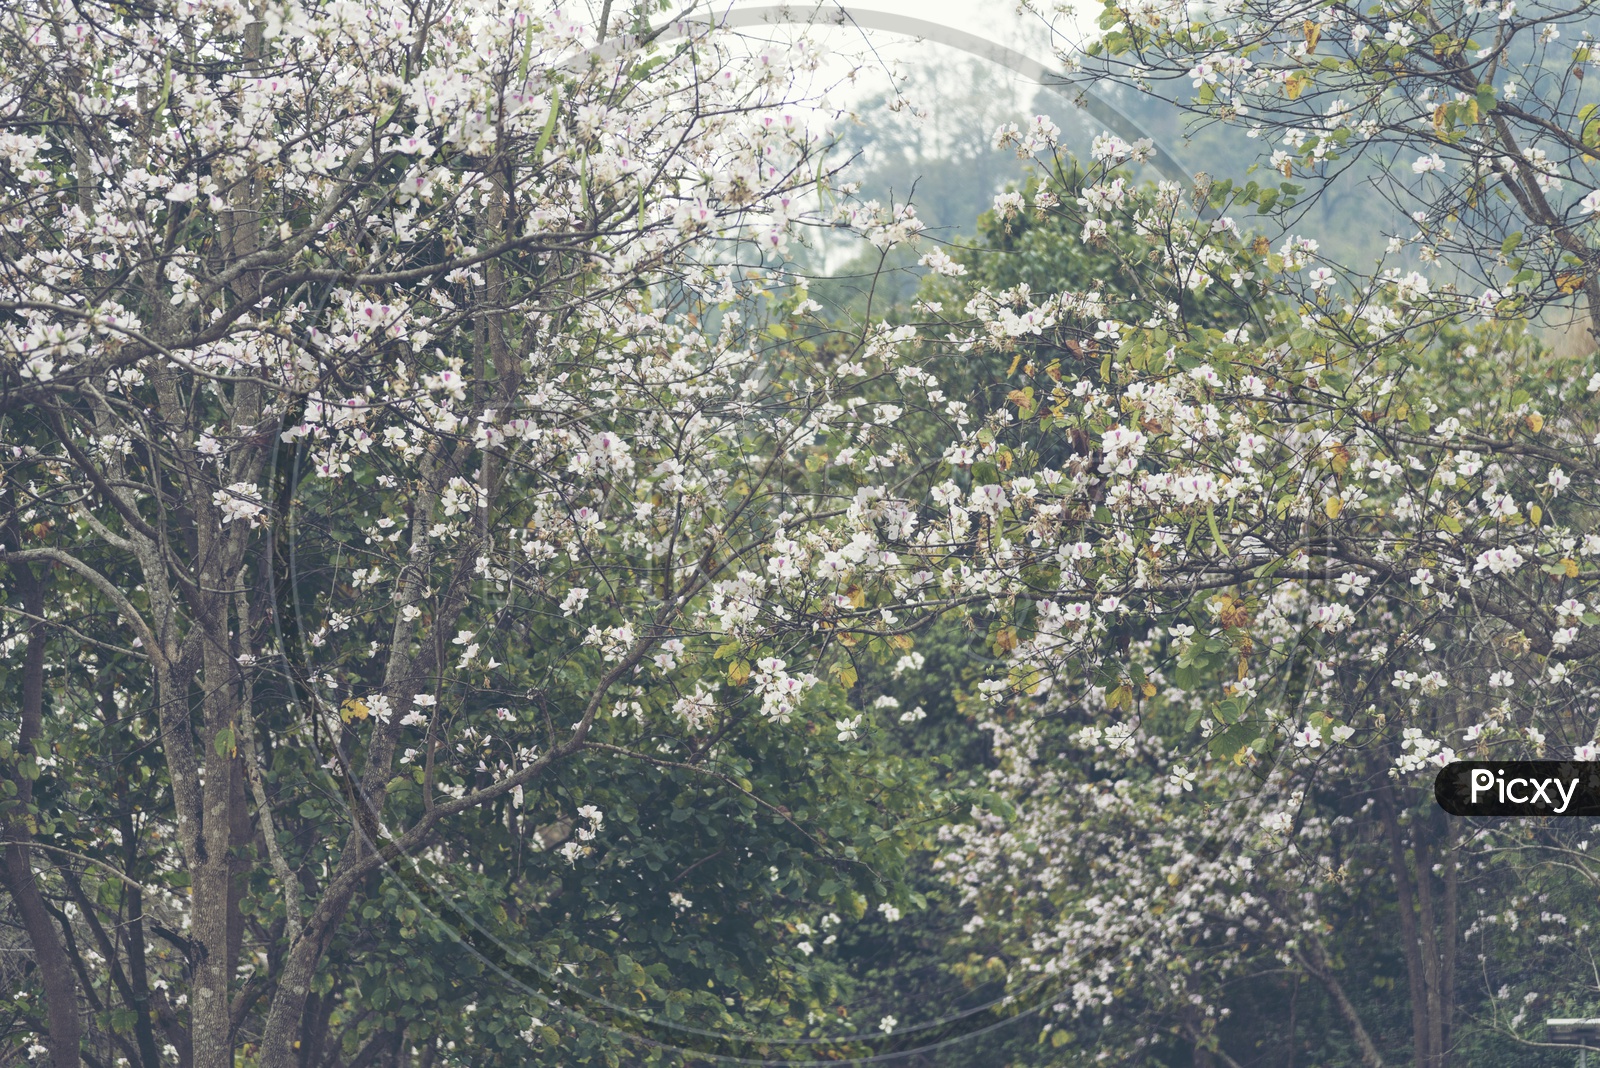 White Flowers On chickasaw Plum  Trees in a Tropical Forest